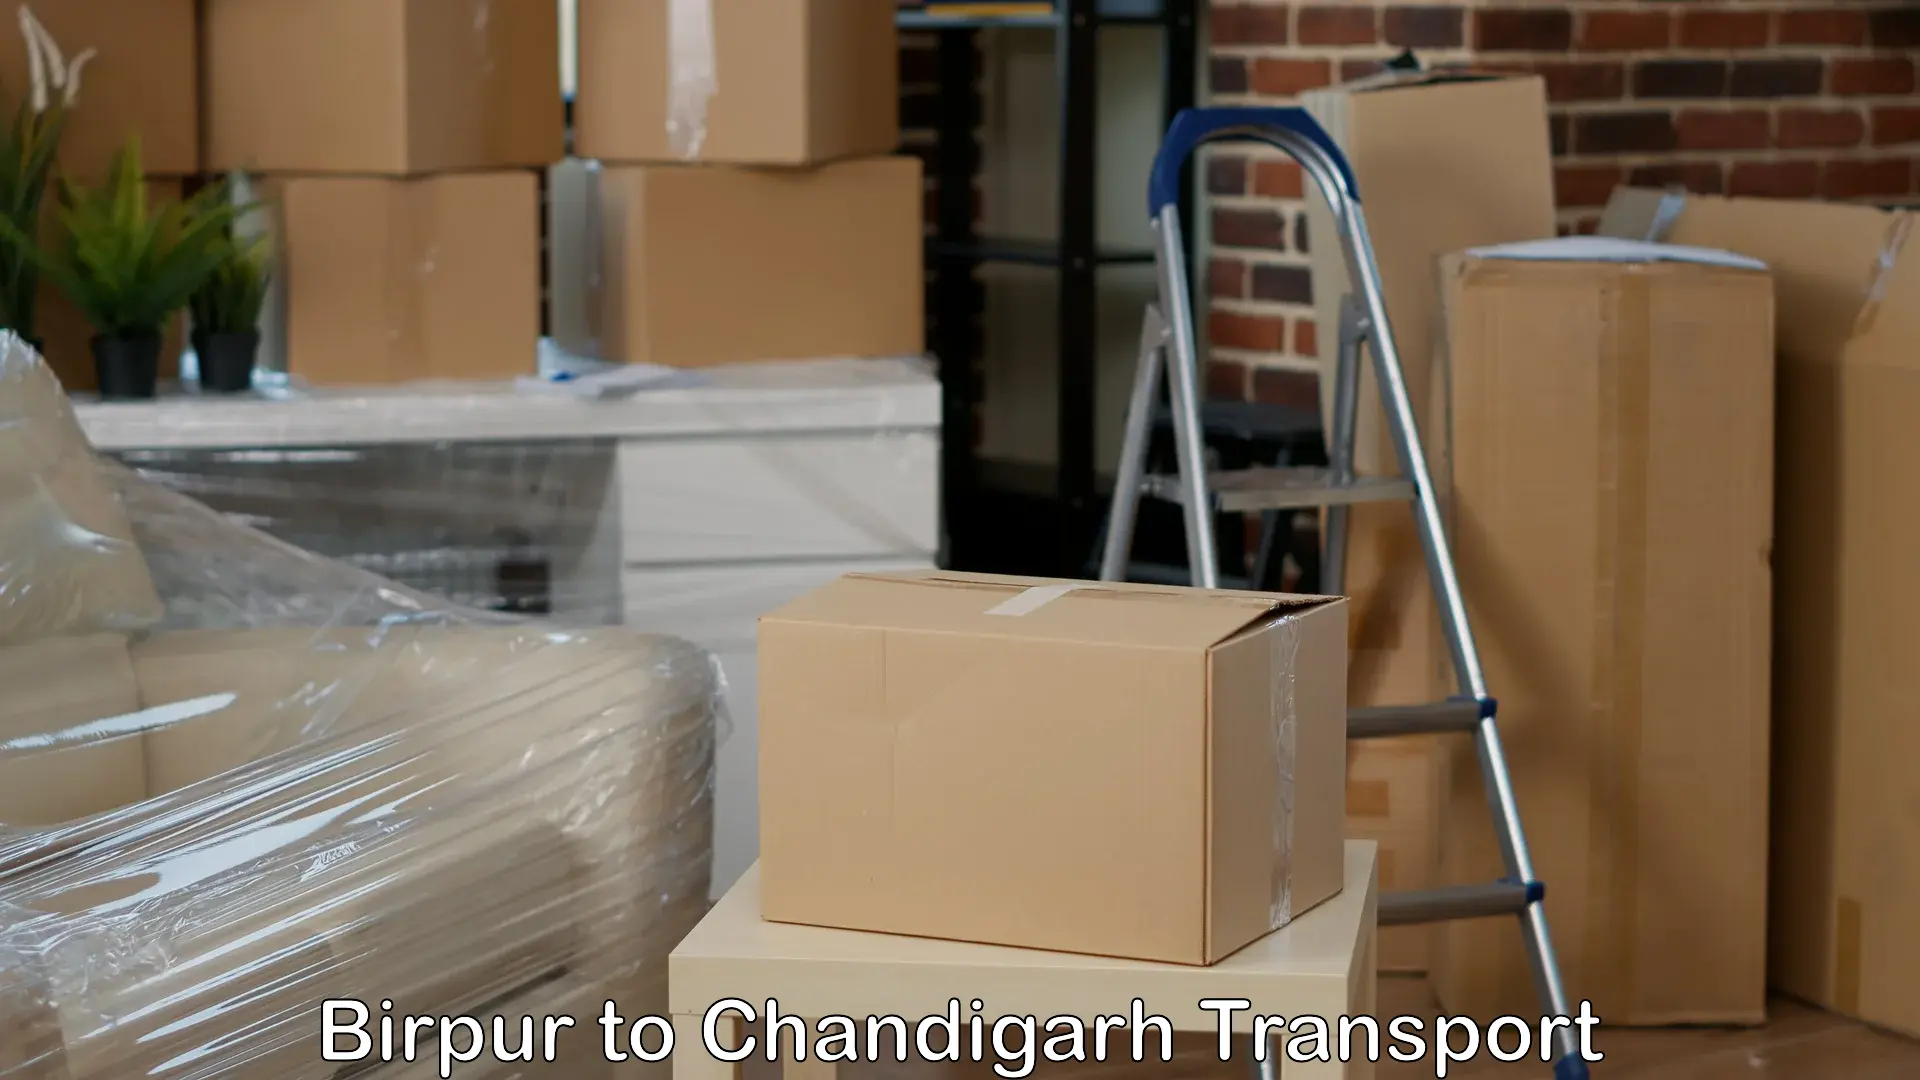 Part load transport service in India Birpur to Chandigarh